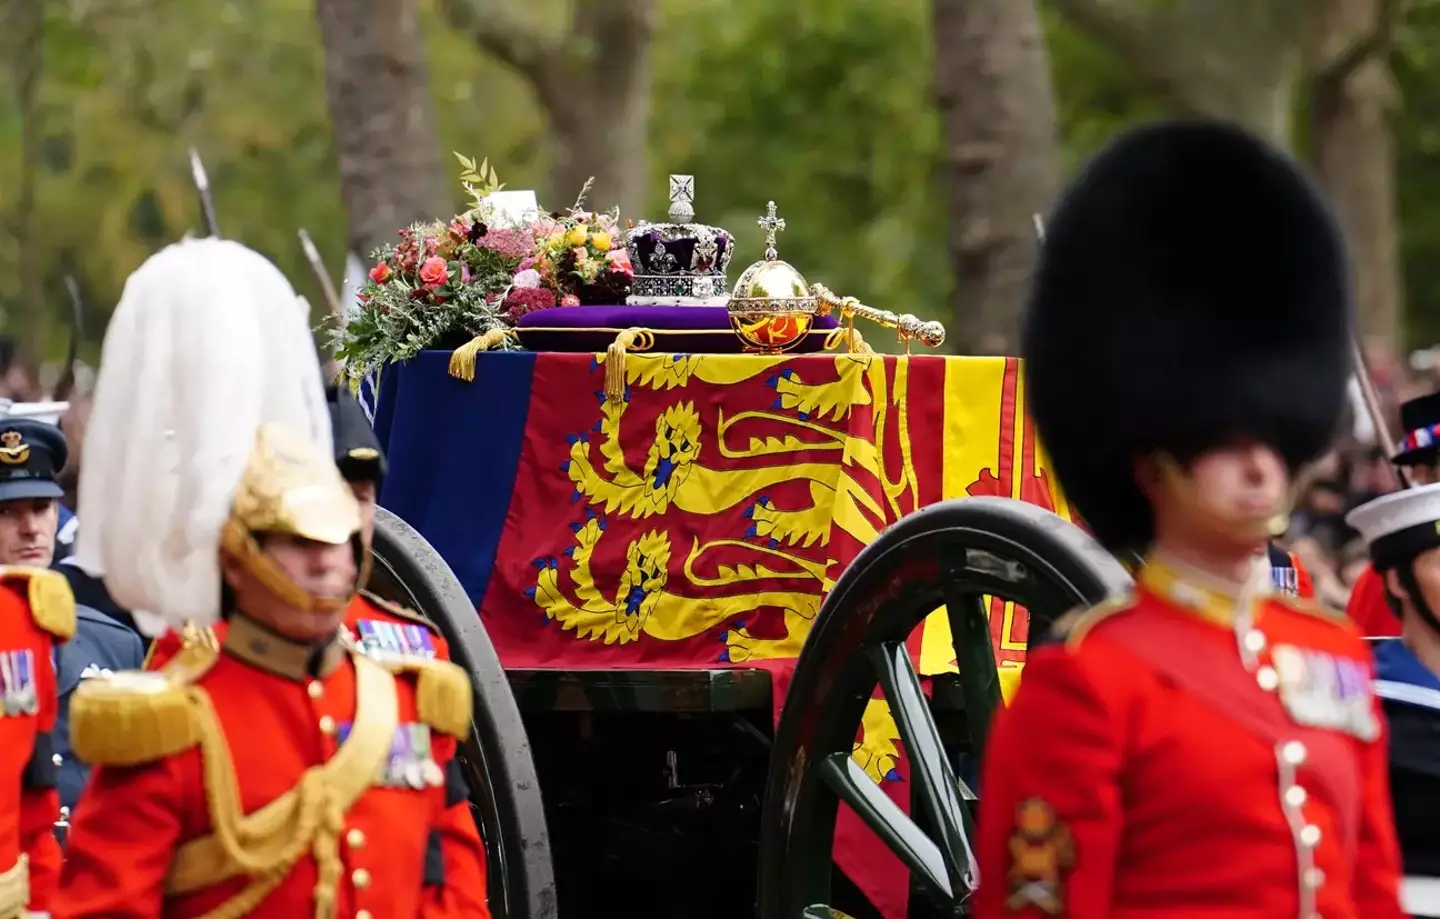 It was predicted that the Queen’s funeral might be the most-watched broadcast in British television history.